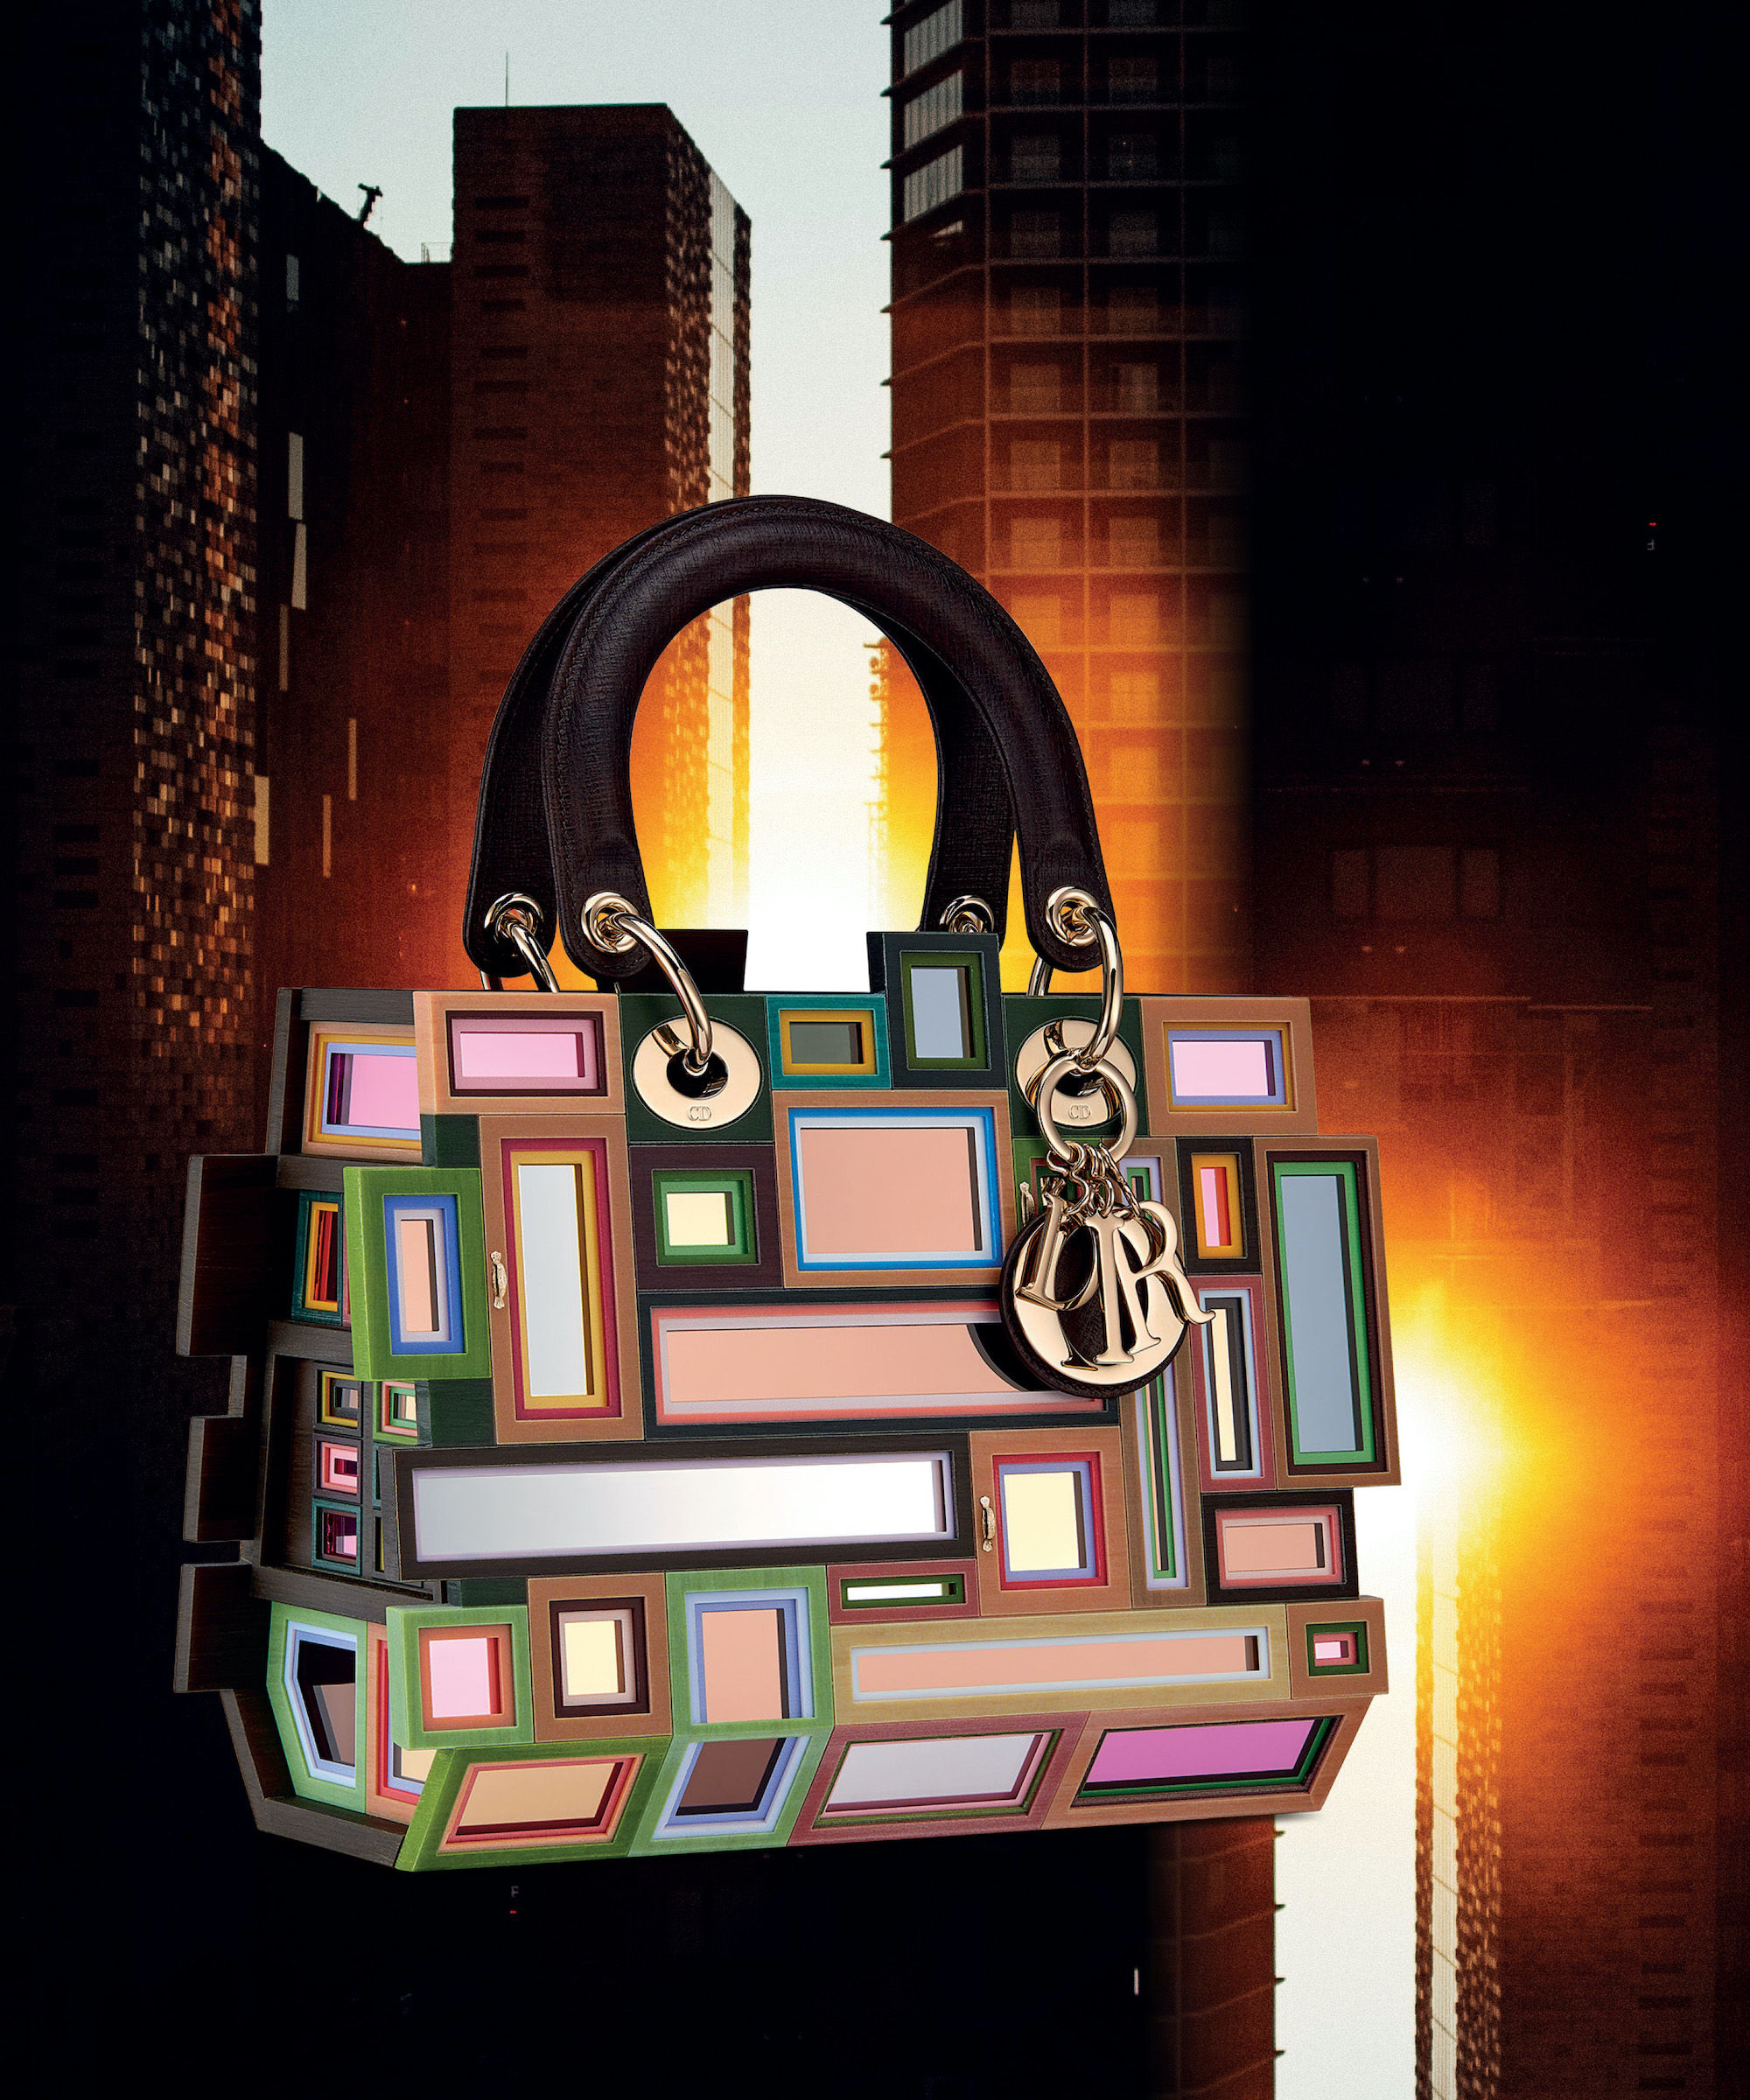 Beijing Artist Song Dong'S Window Bag For The Fifth Dior Lady Art Project  Is A Sight To Behold